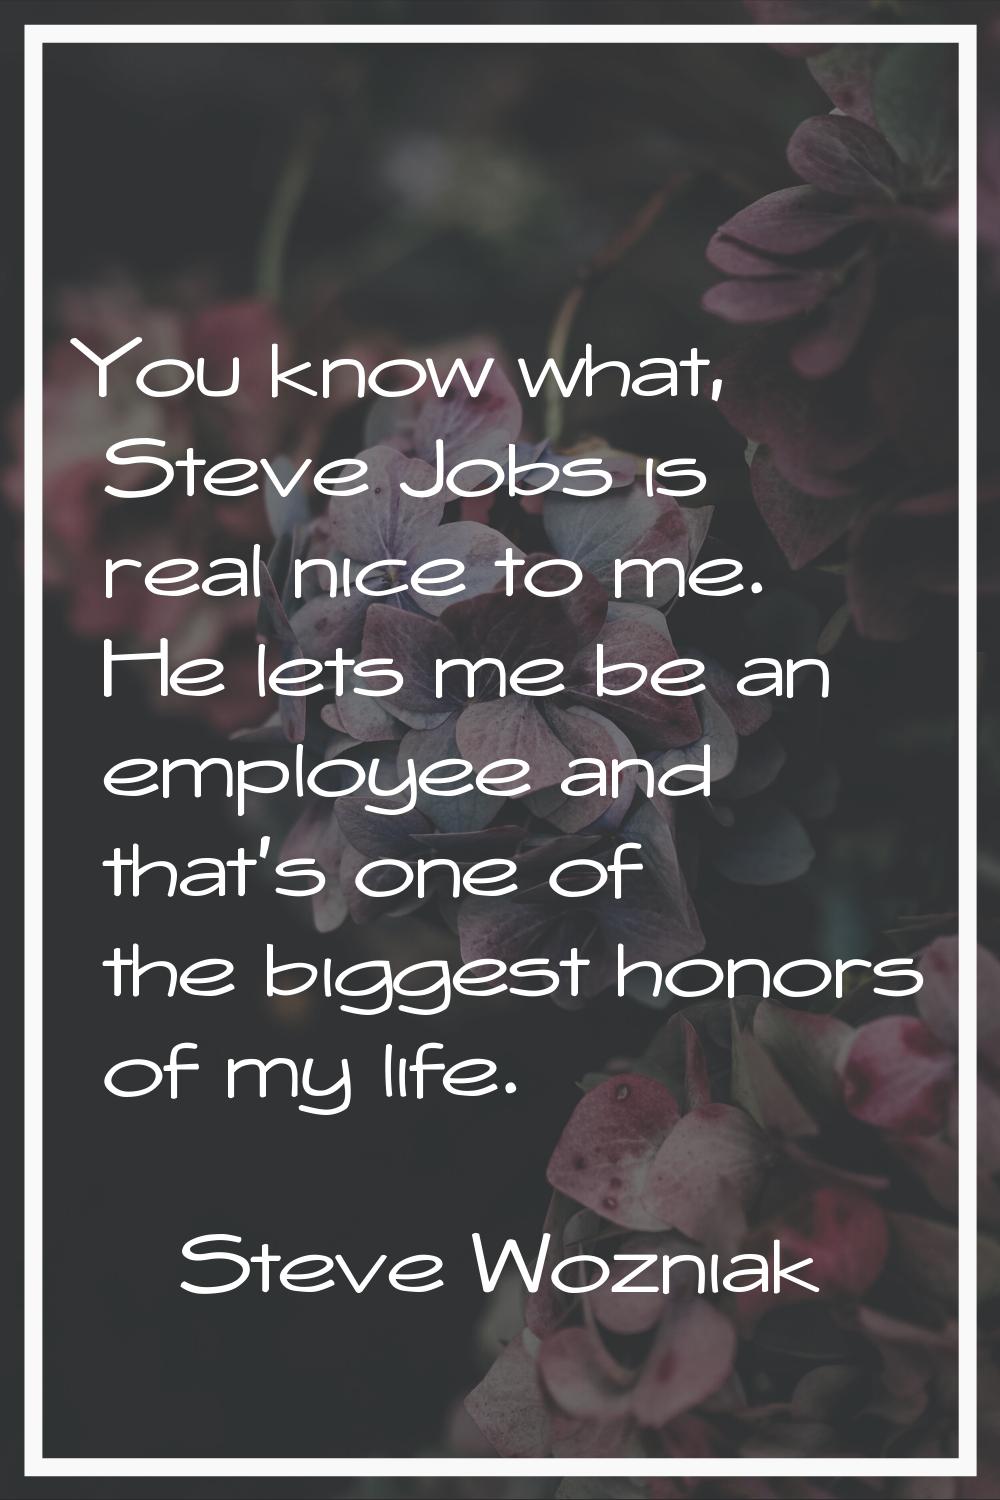 You know what, Steve Jobs is real nice to me. He lets me be an employee and that's one of the bigge